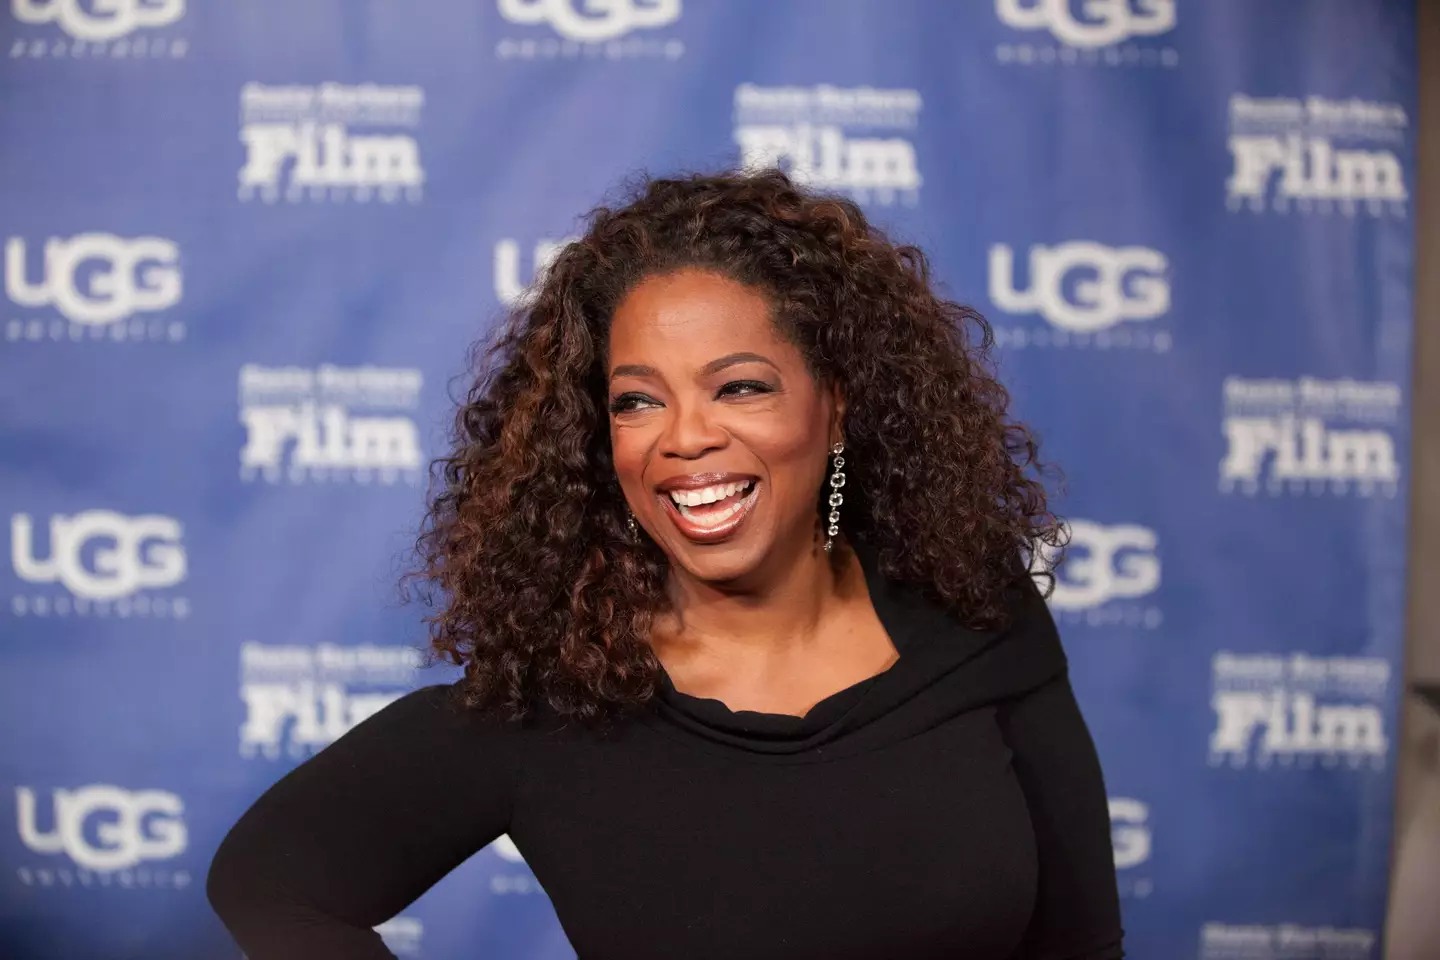 Fans have been left divided over the exchange between Oprah and a tight-pocketed fan.